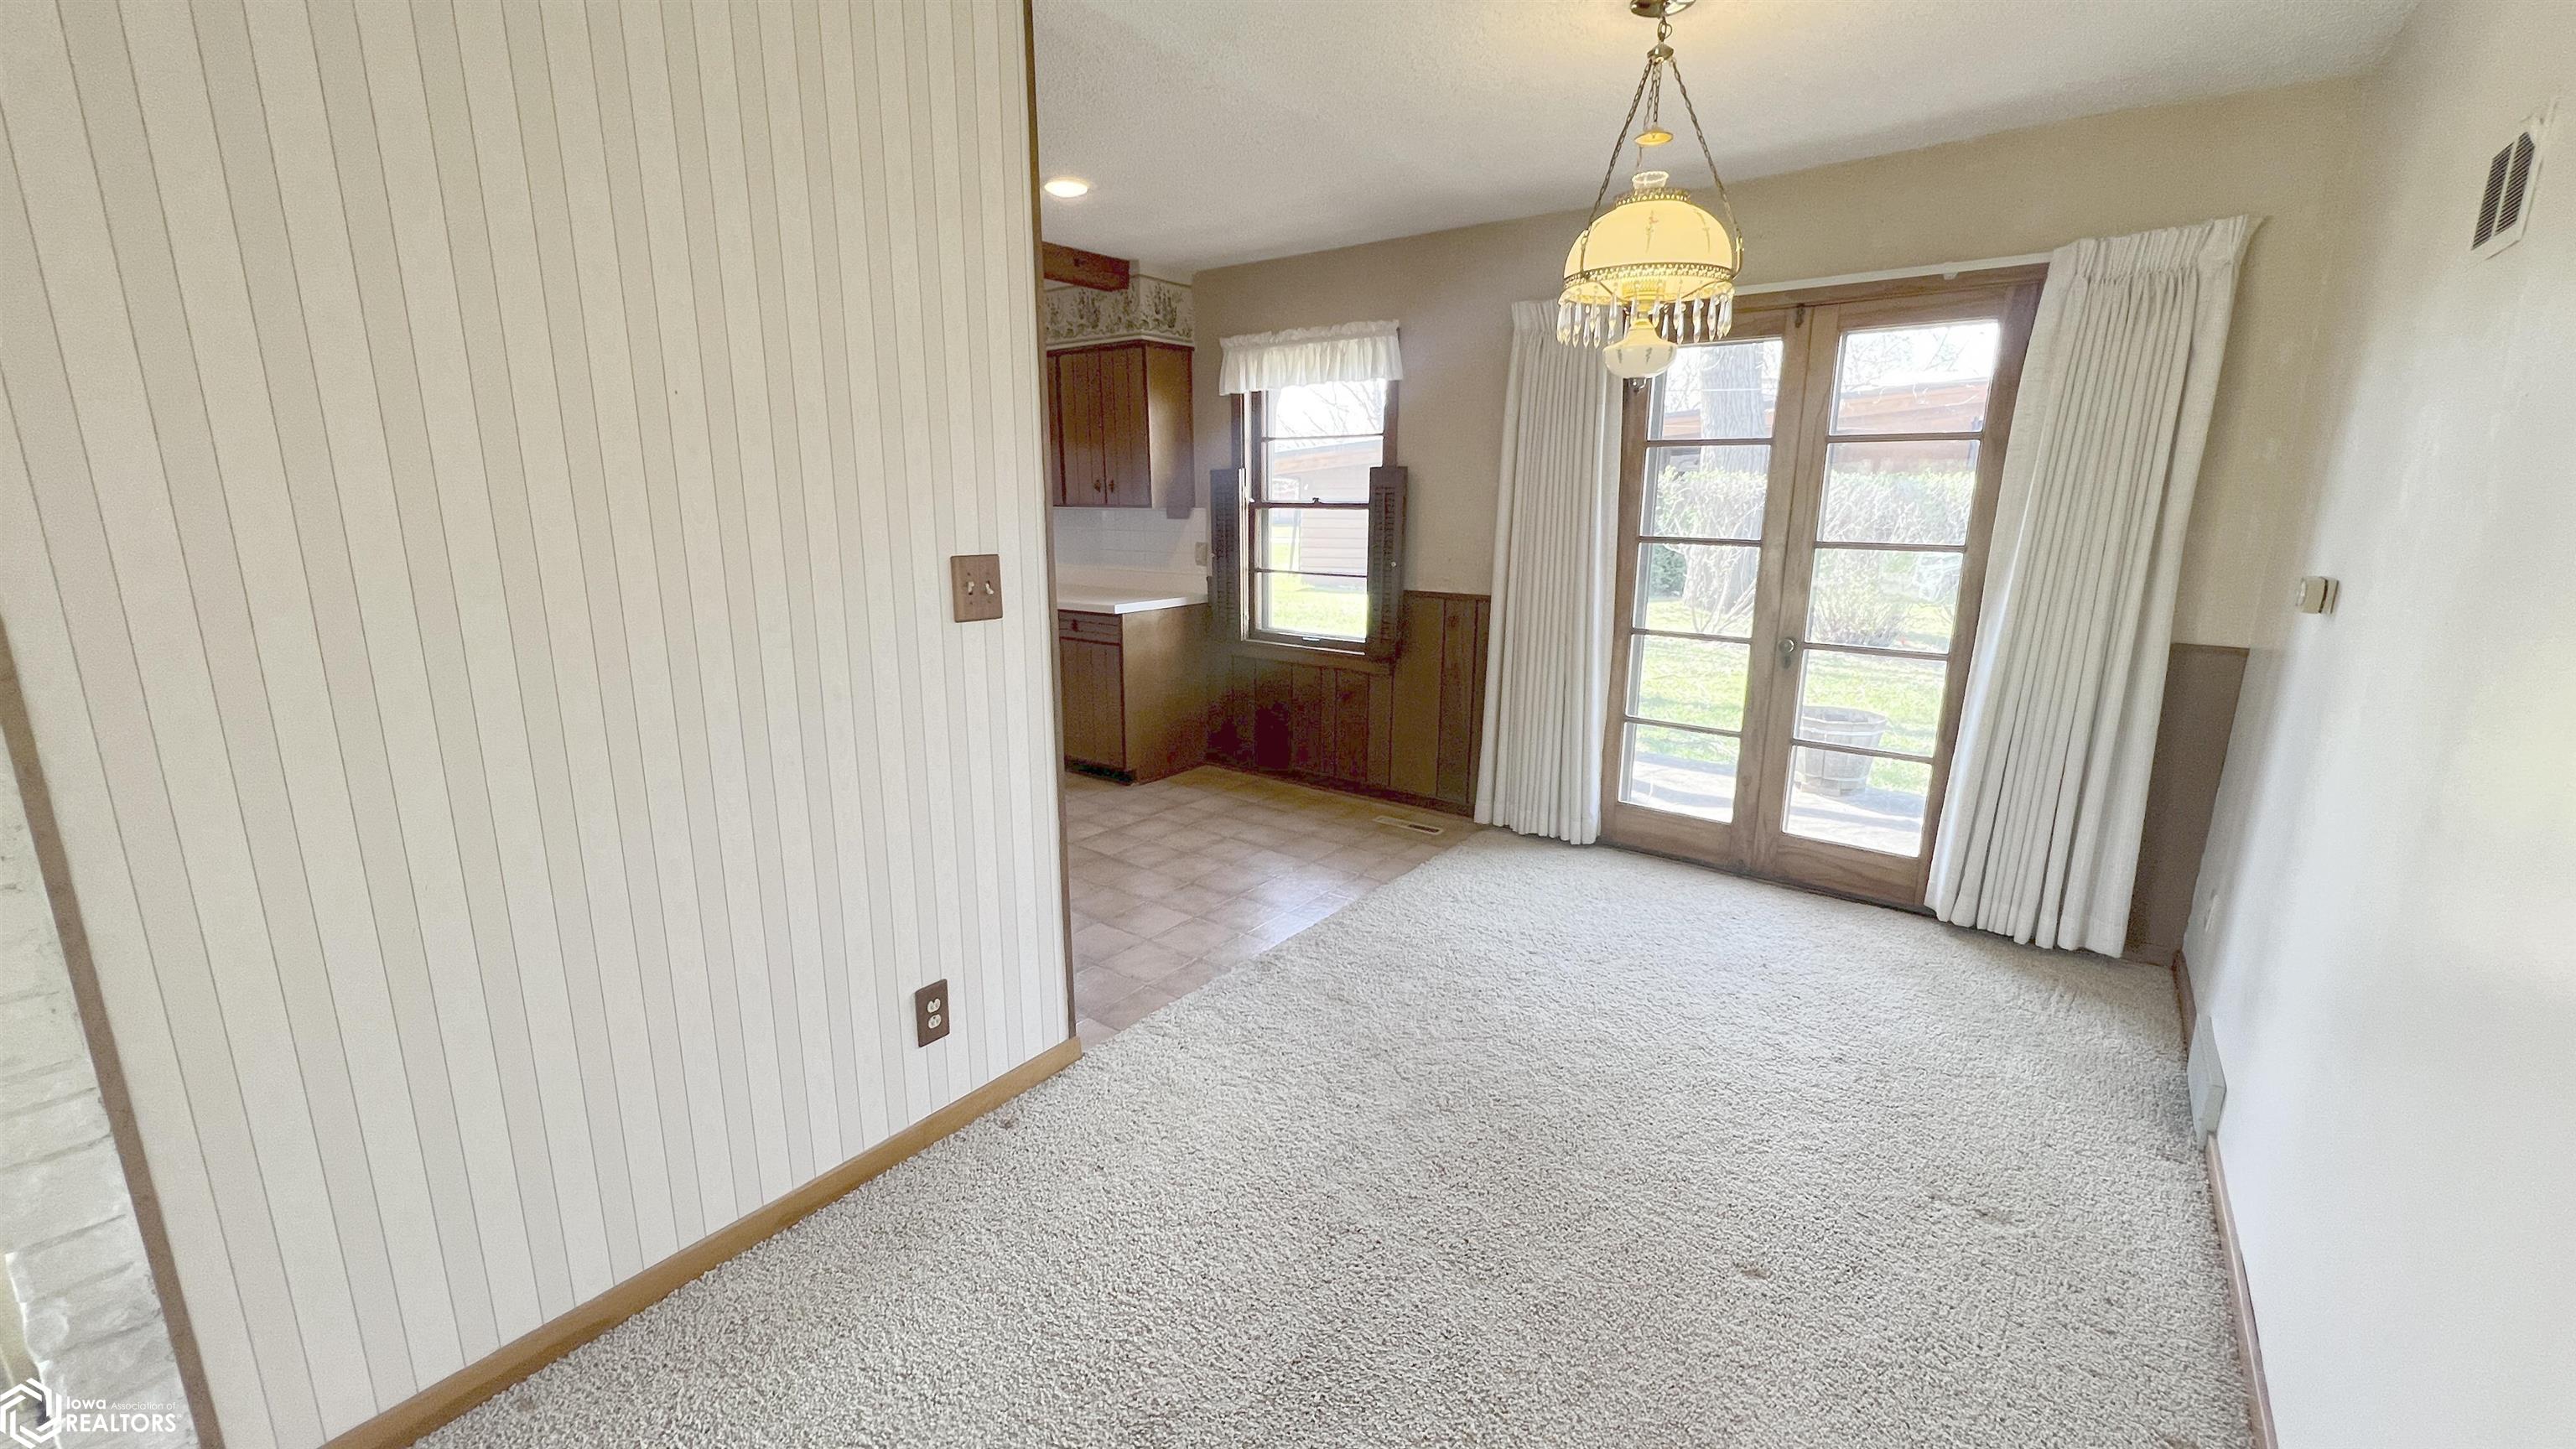 118 Willowbrook, Mason City, Iowa 50401, 3 Bedrooms Bedrooms, ,1 BathroomBathrooms,Single Family,For Sale,Willowbrook,6316393